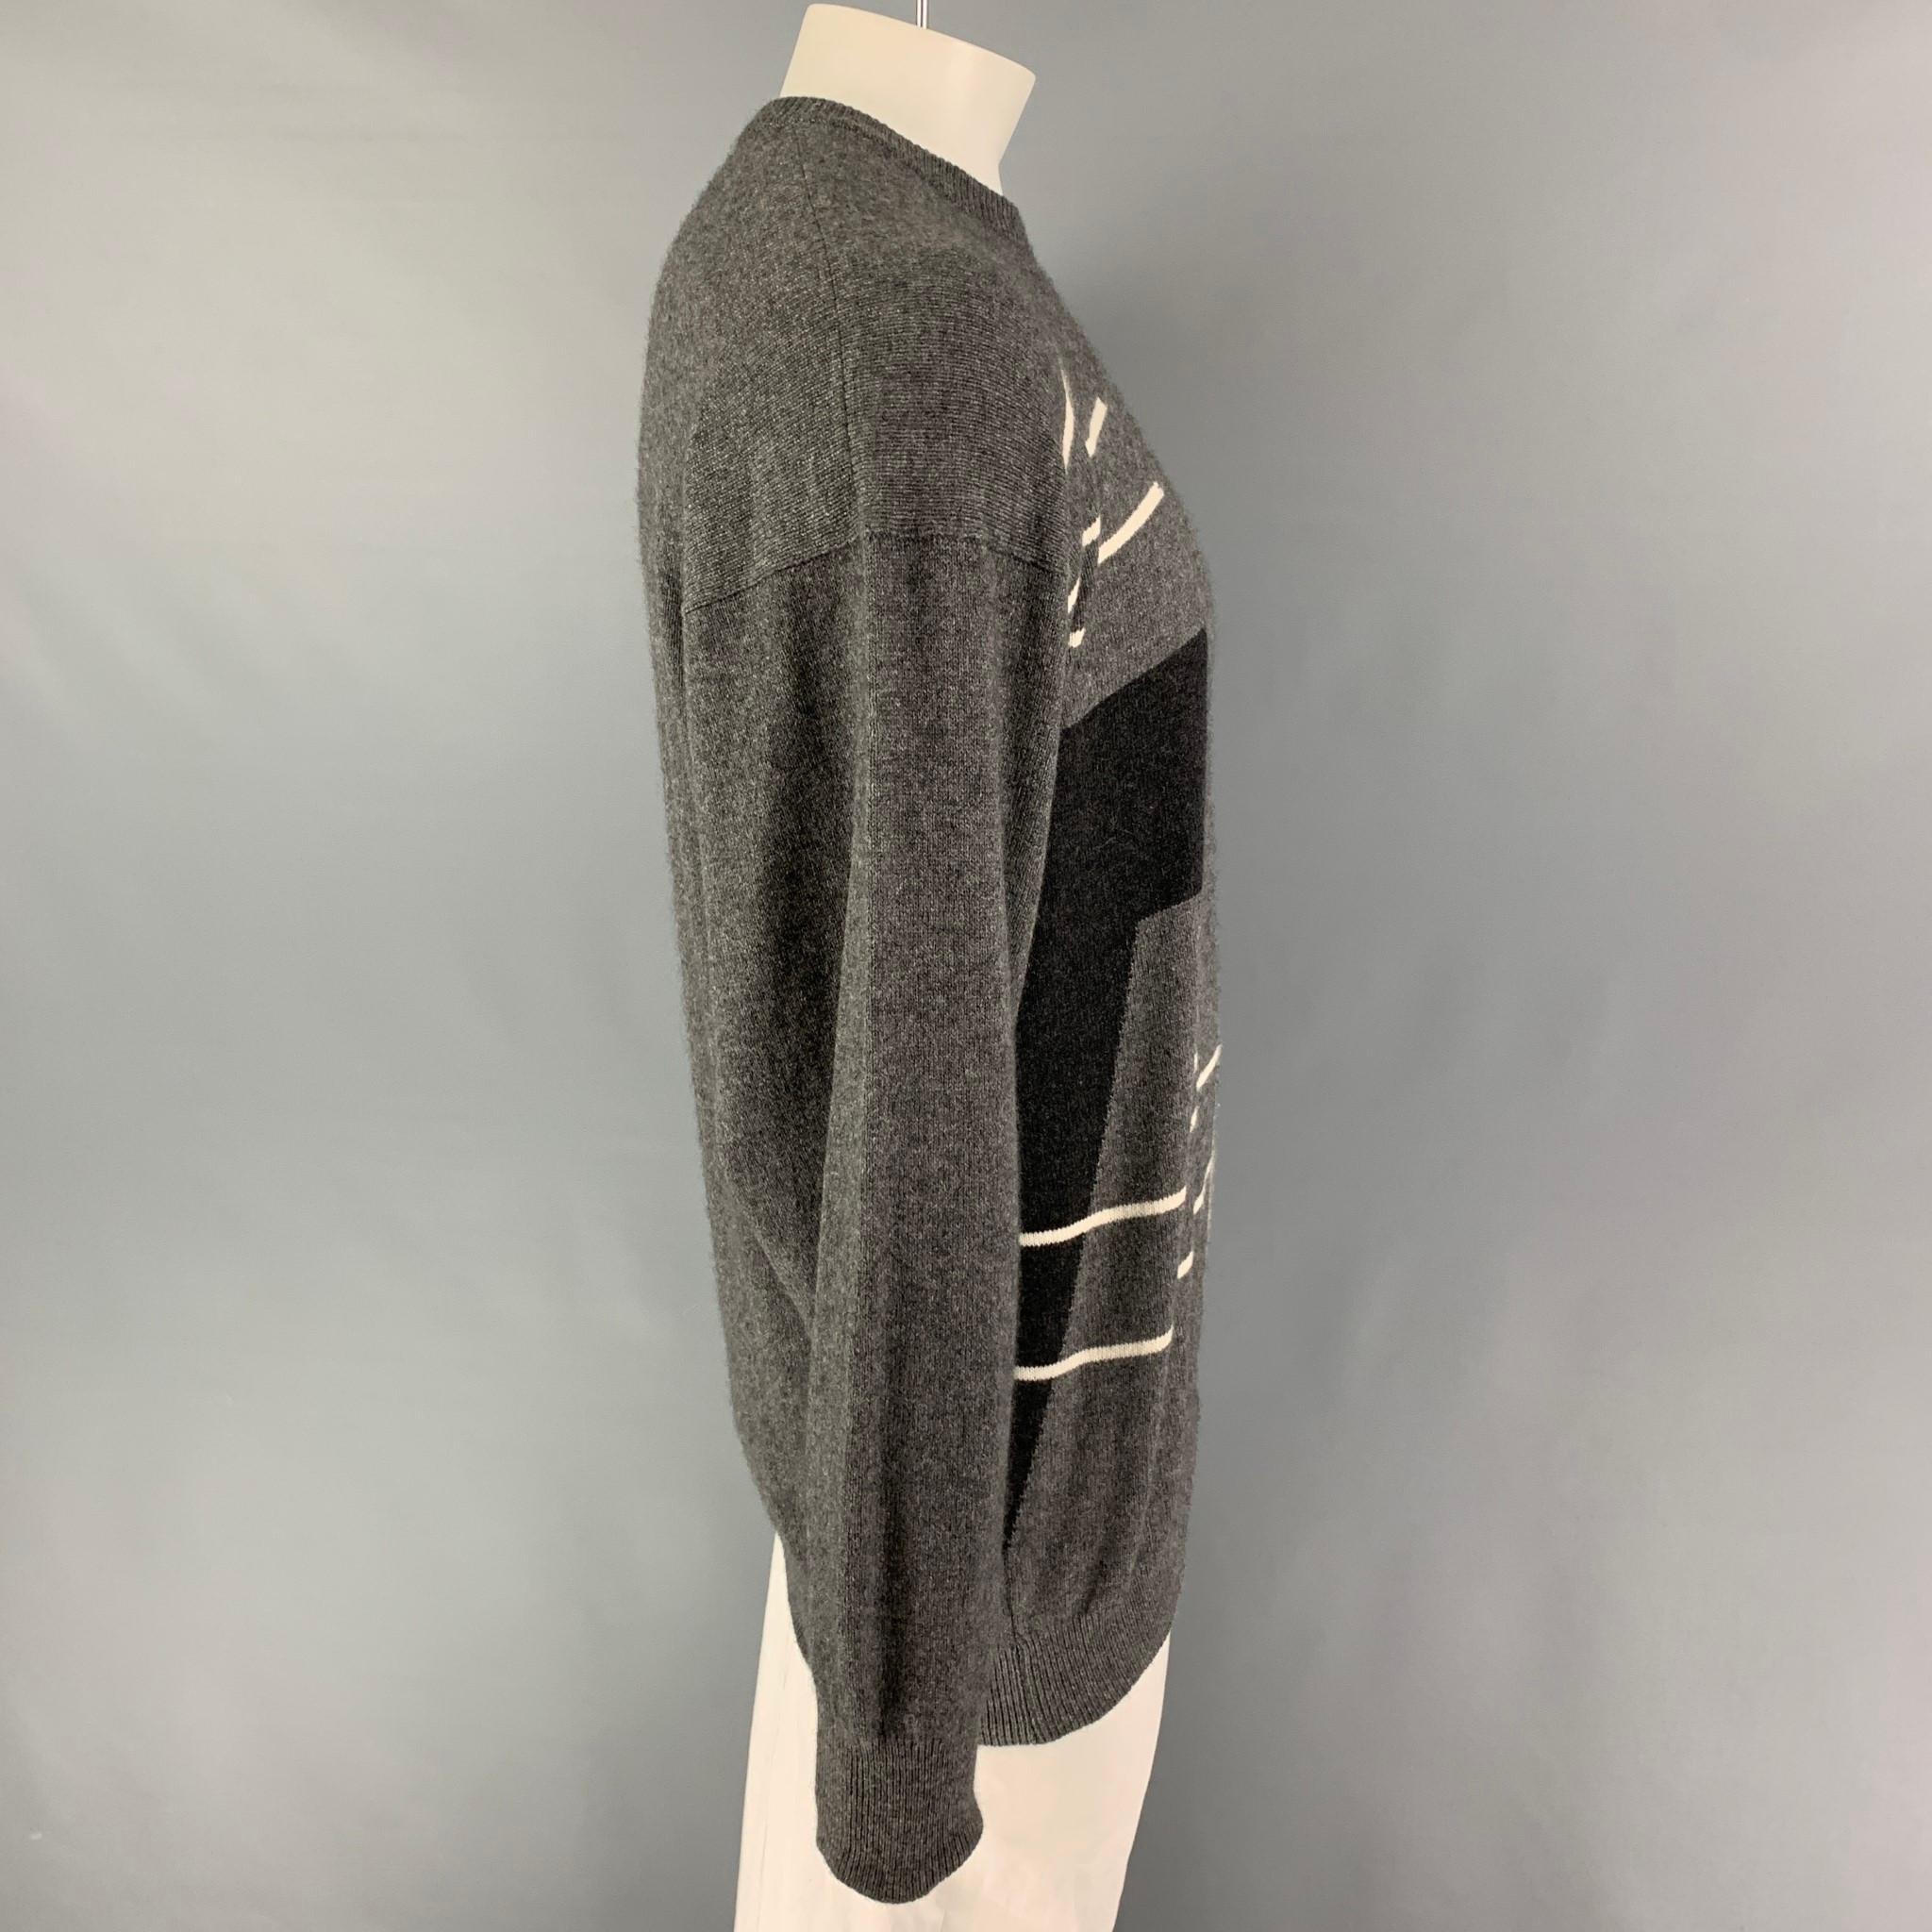 NEIMAN MARCUS sweater comes in a multi-color geometric print cashmere featuring a crew-neck. 

Very Good Pre-Owned Condition.
Marked: XL

Measurements:

Shoulder: 26 in.
Chest: 48 in.
Sleeve: 24 in.
Length: 29.5 in. 